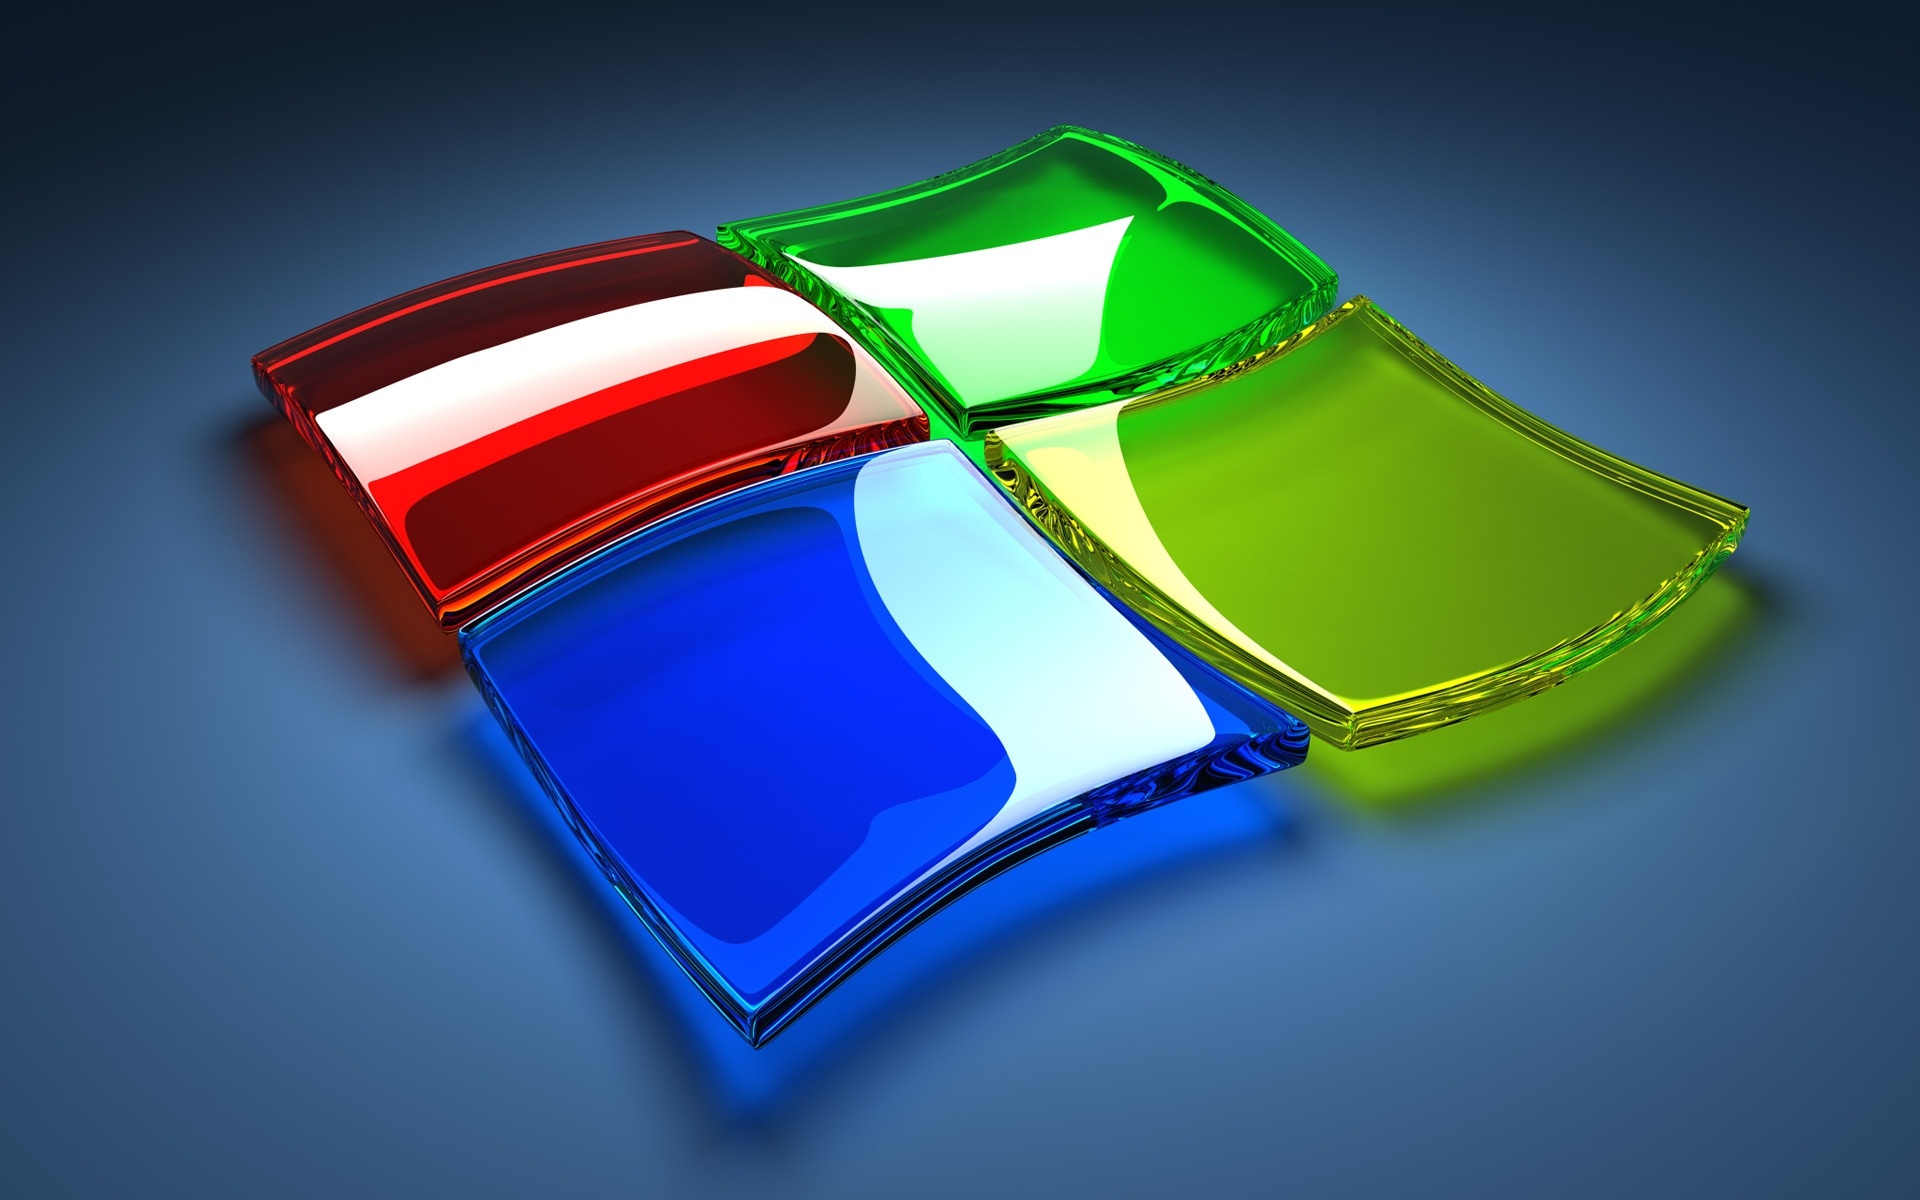 Free Download Hd Windows Logo Desktop Backgrounds 1920x1200 For Your